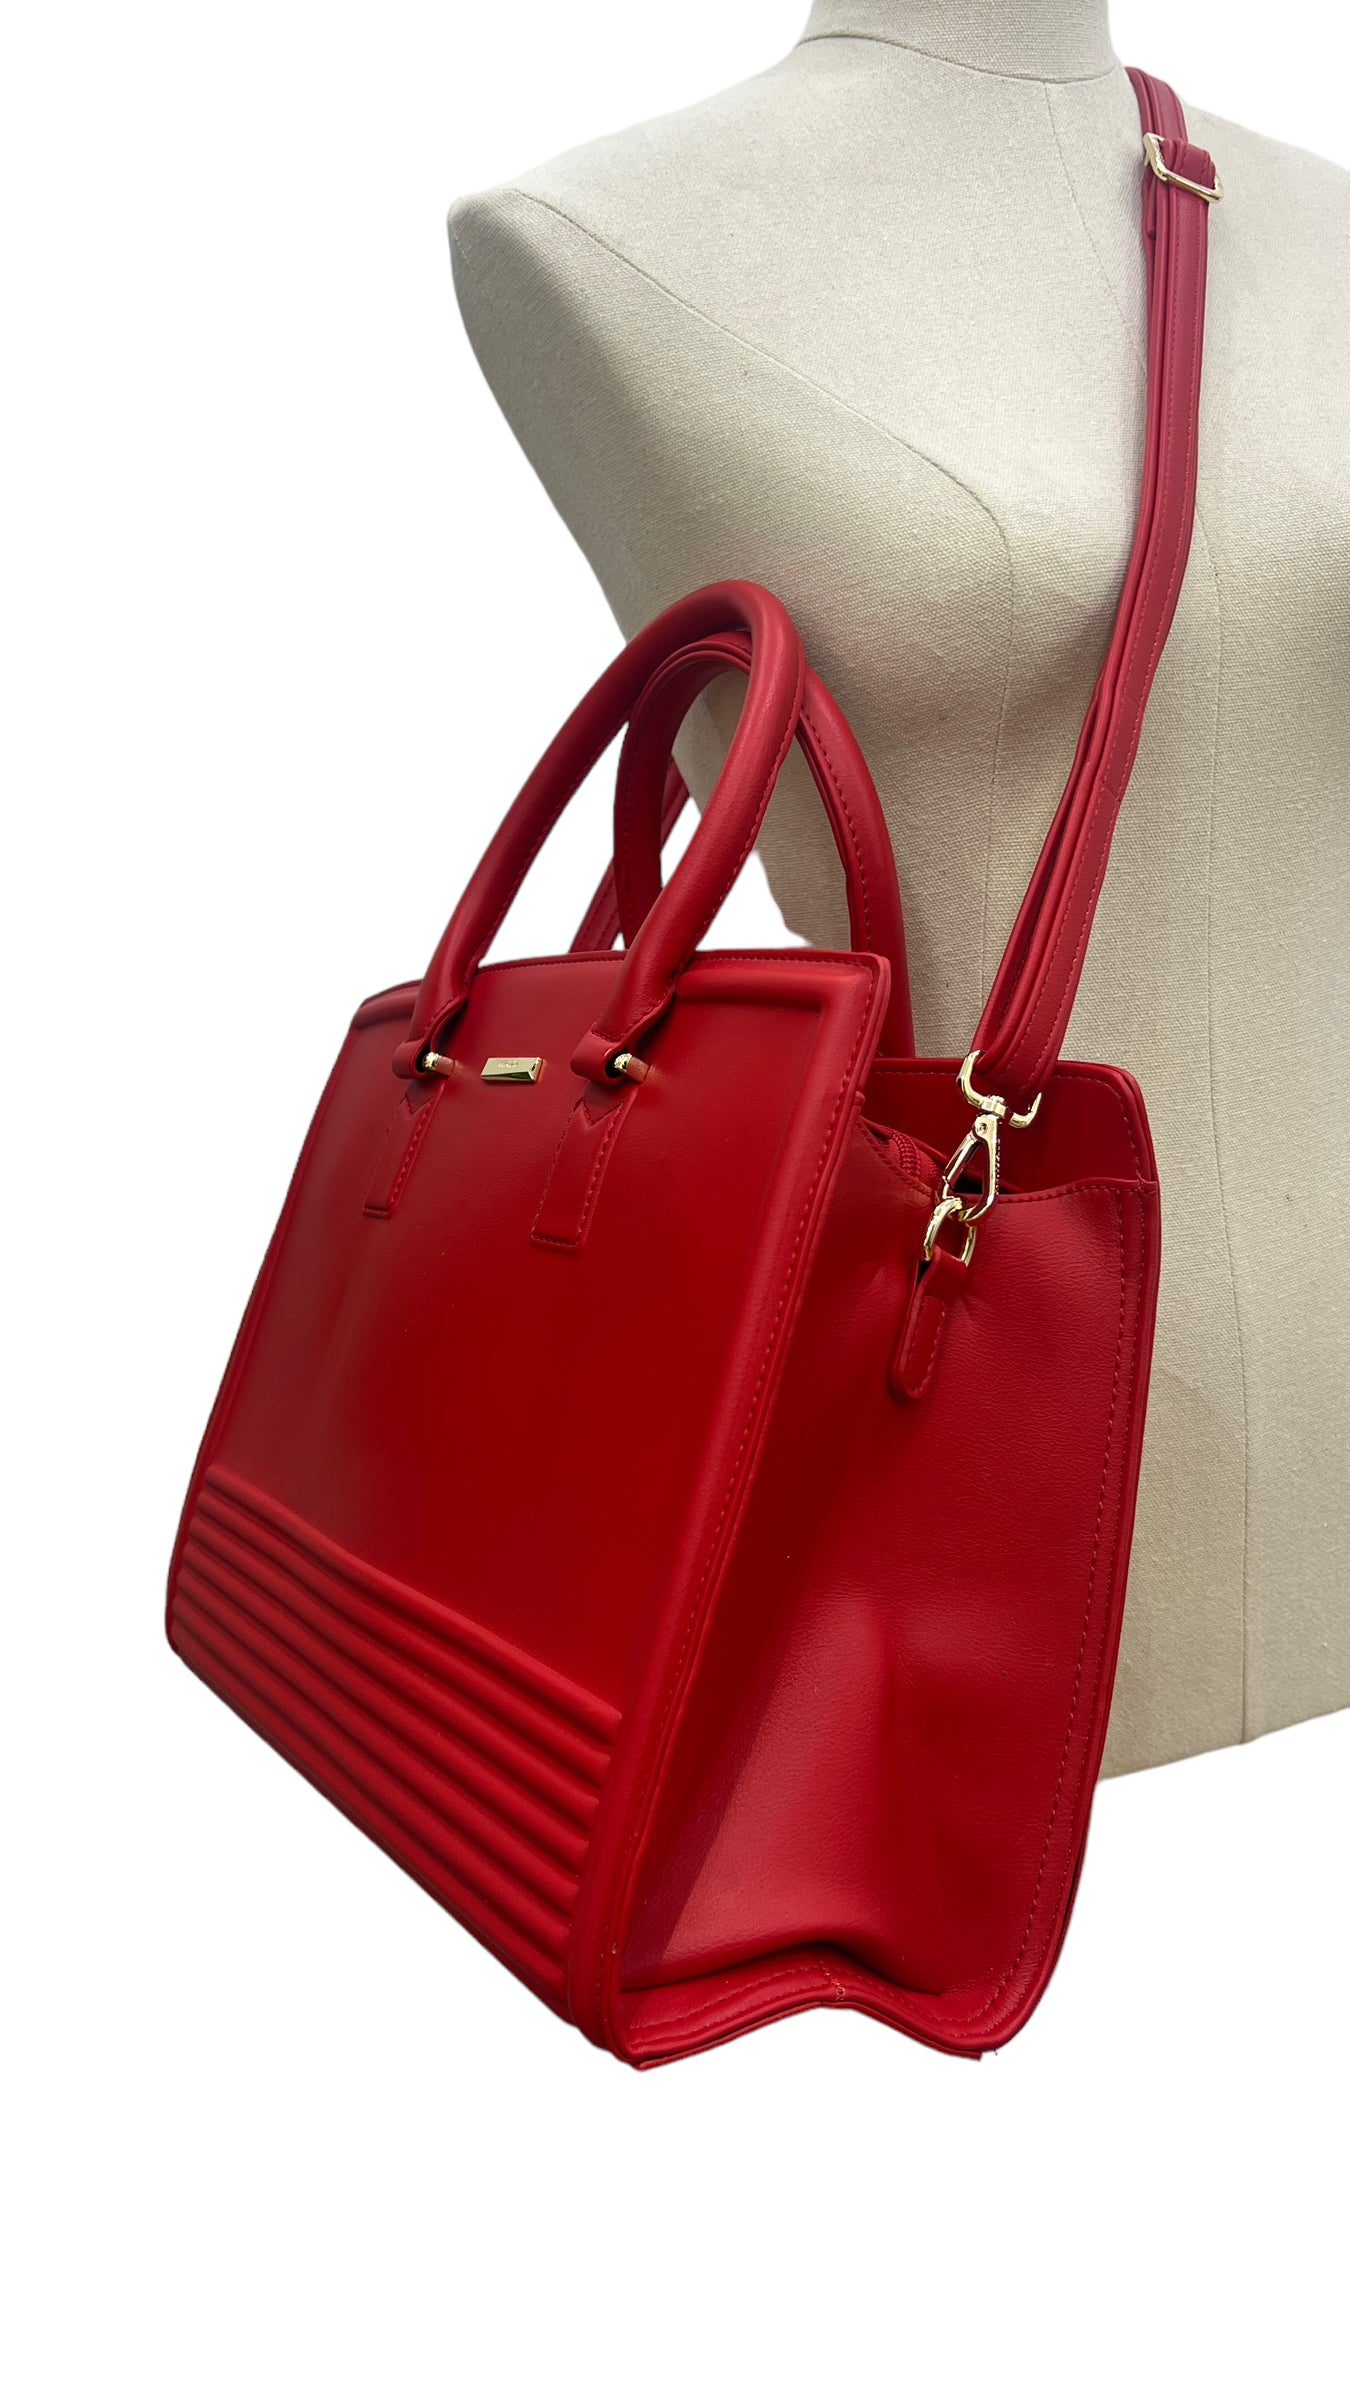 CHRISBELLA RED LARGE DOUBLE HANDLE STRUCTURED BAG